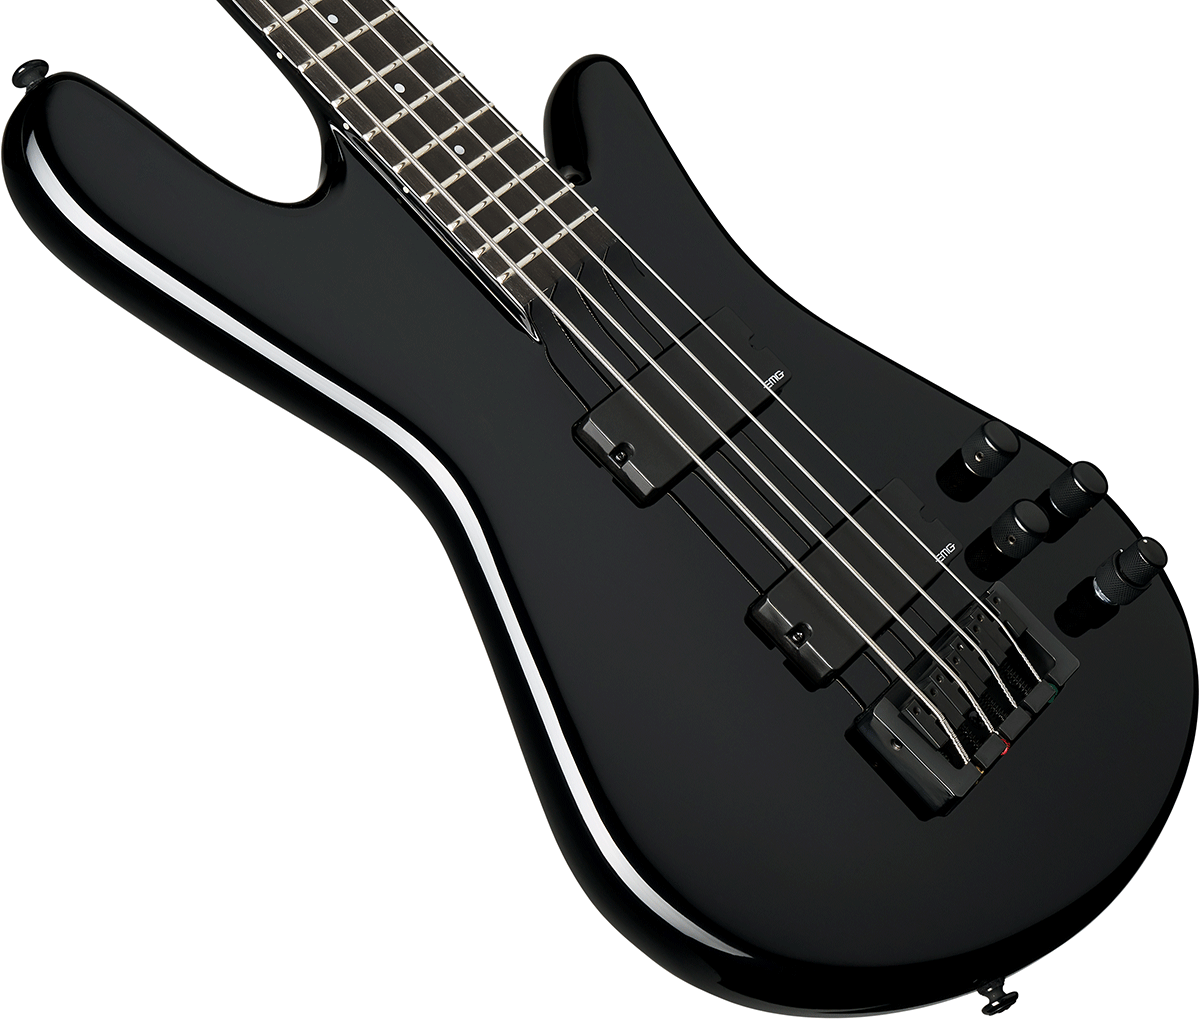 Spector Ns Ethos Hp 4 Eb - Solid Black Gloss - Solidbody E-bass - Variation 2